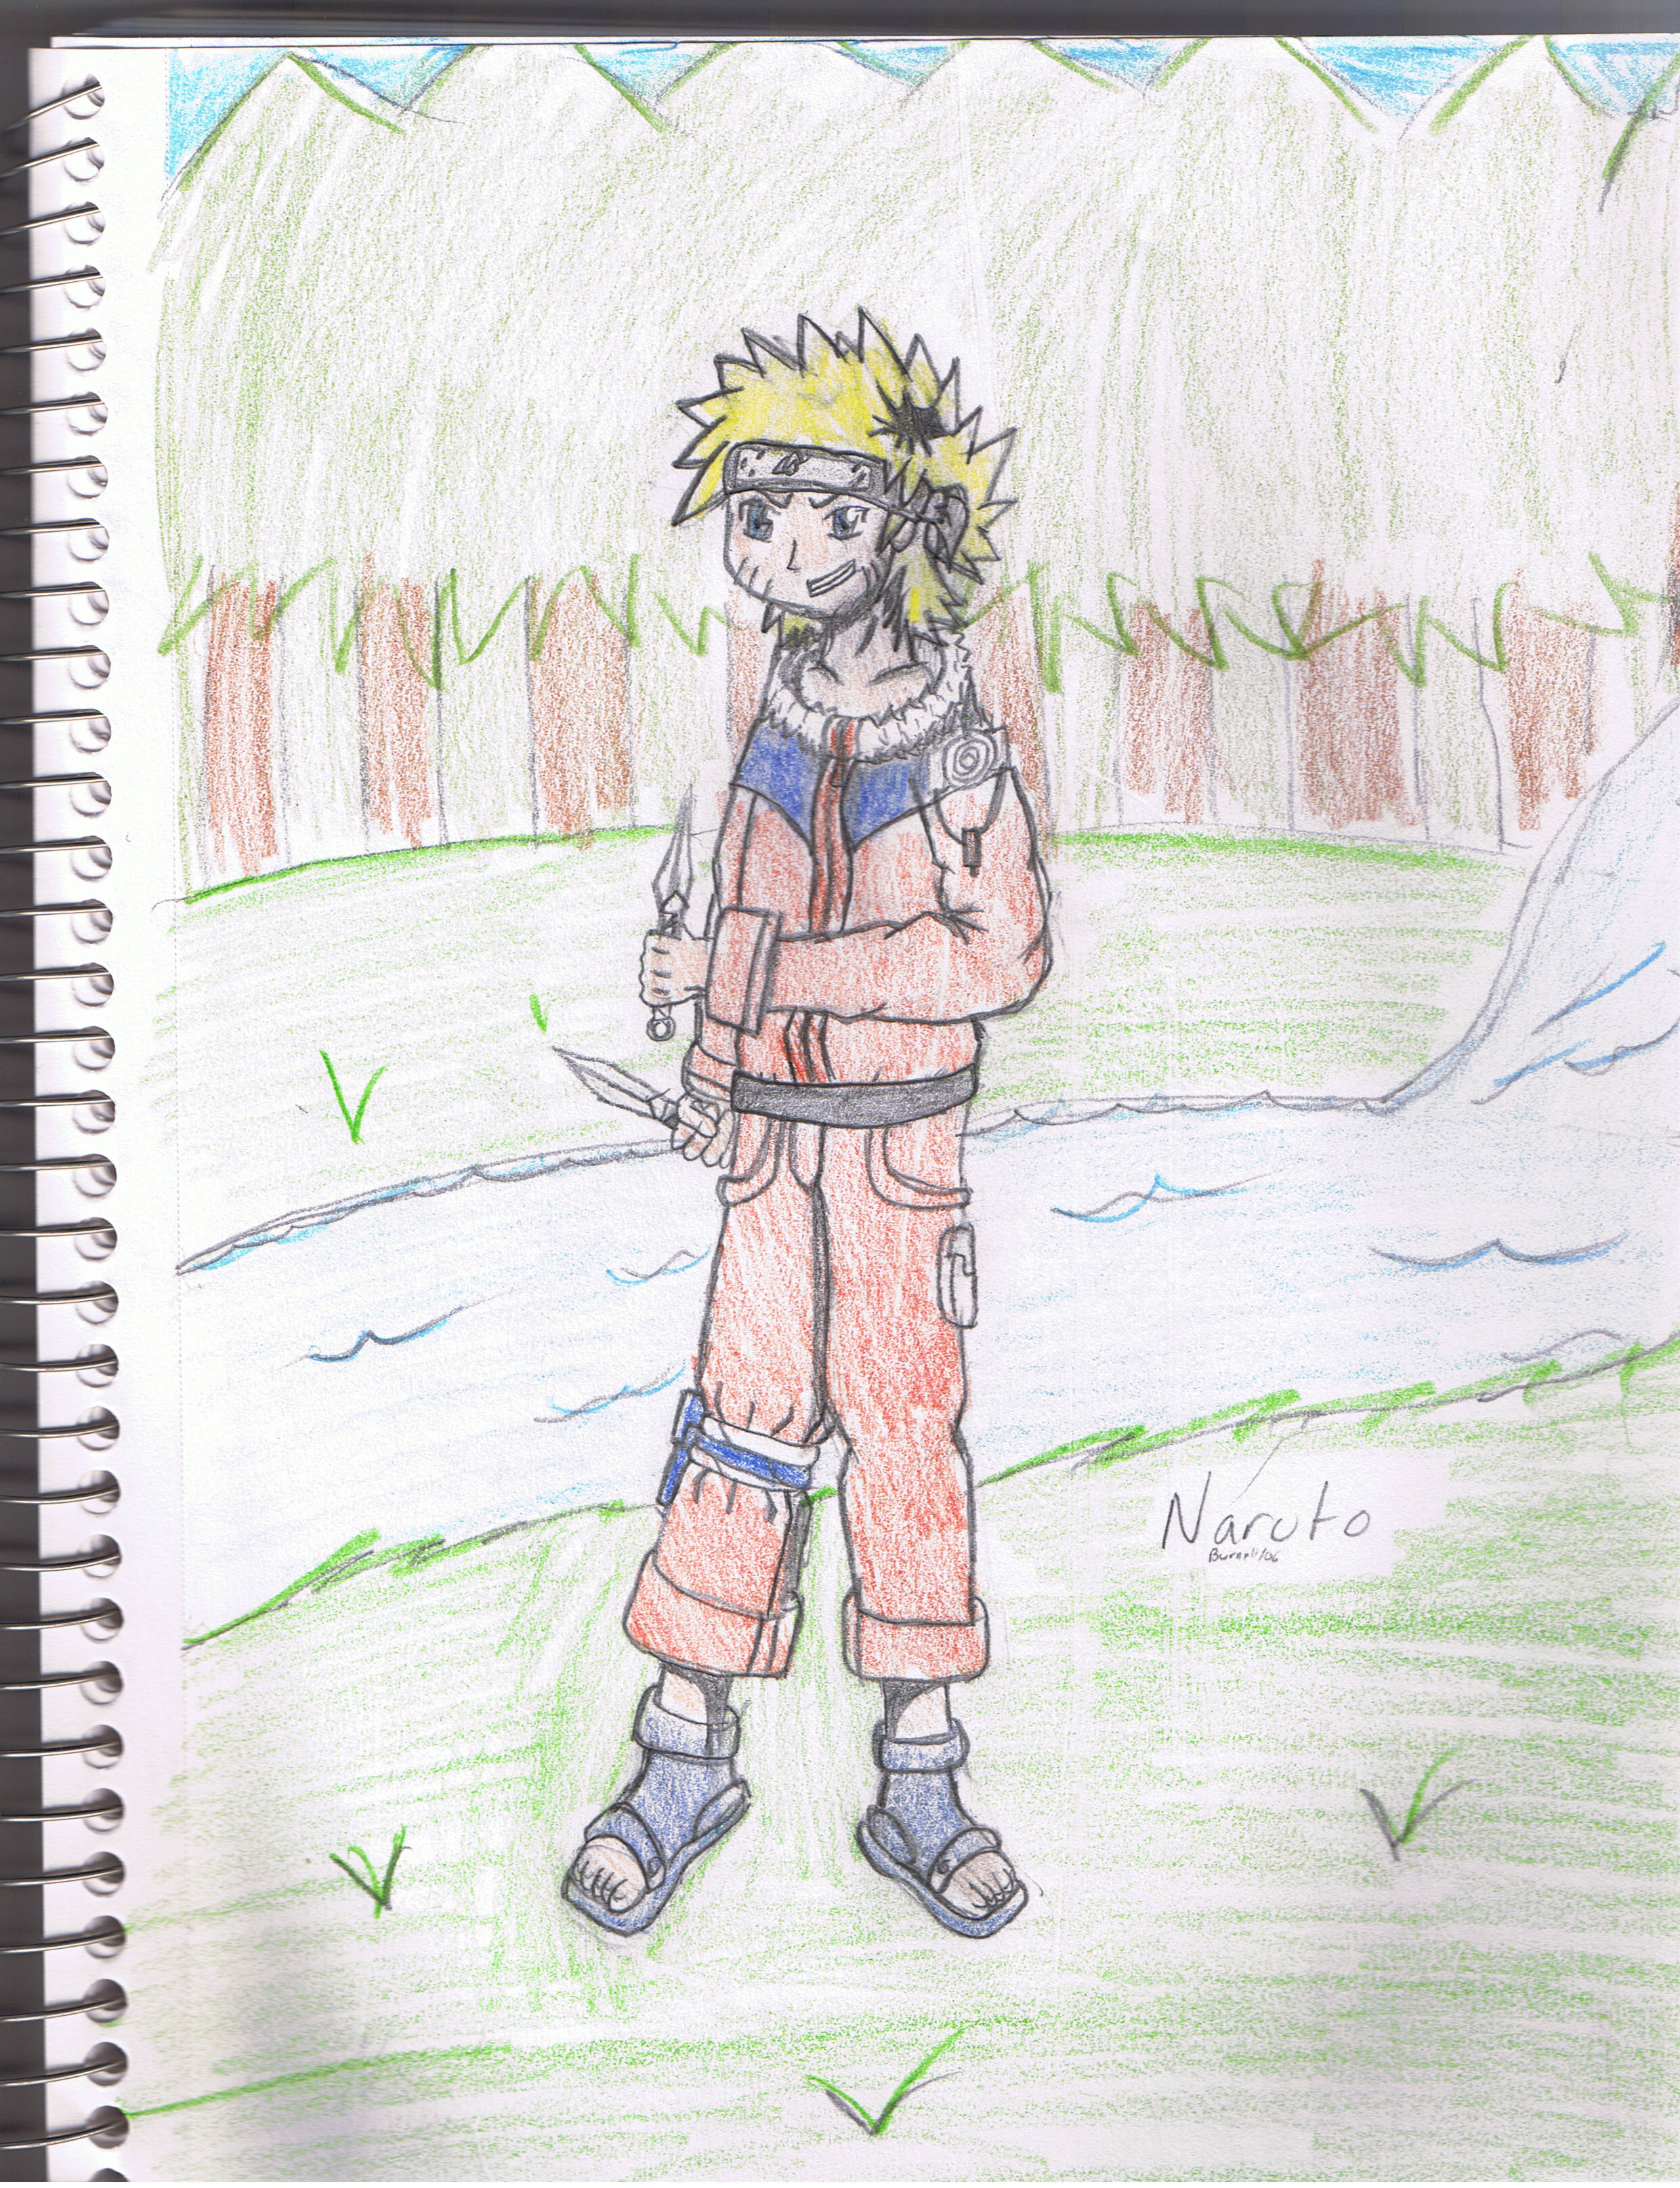 Naruto pic2 by iloveanime